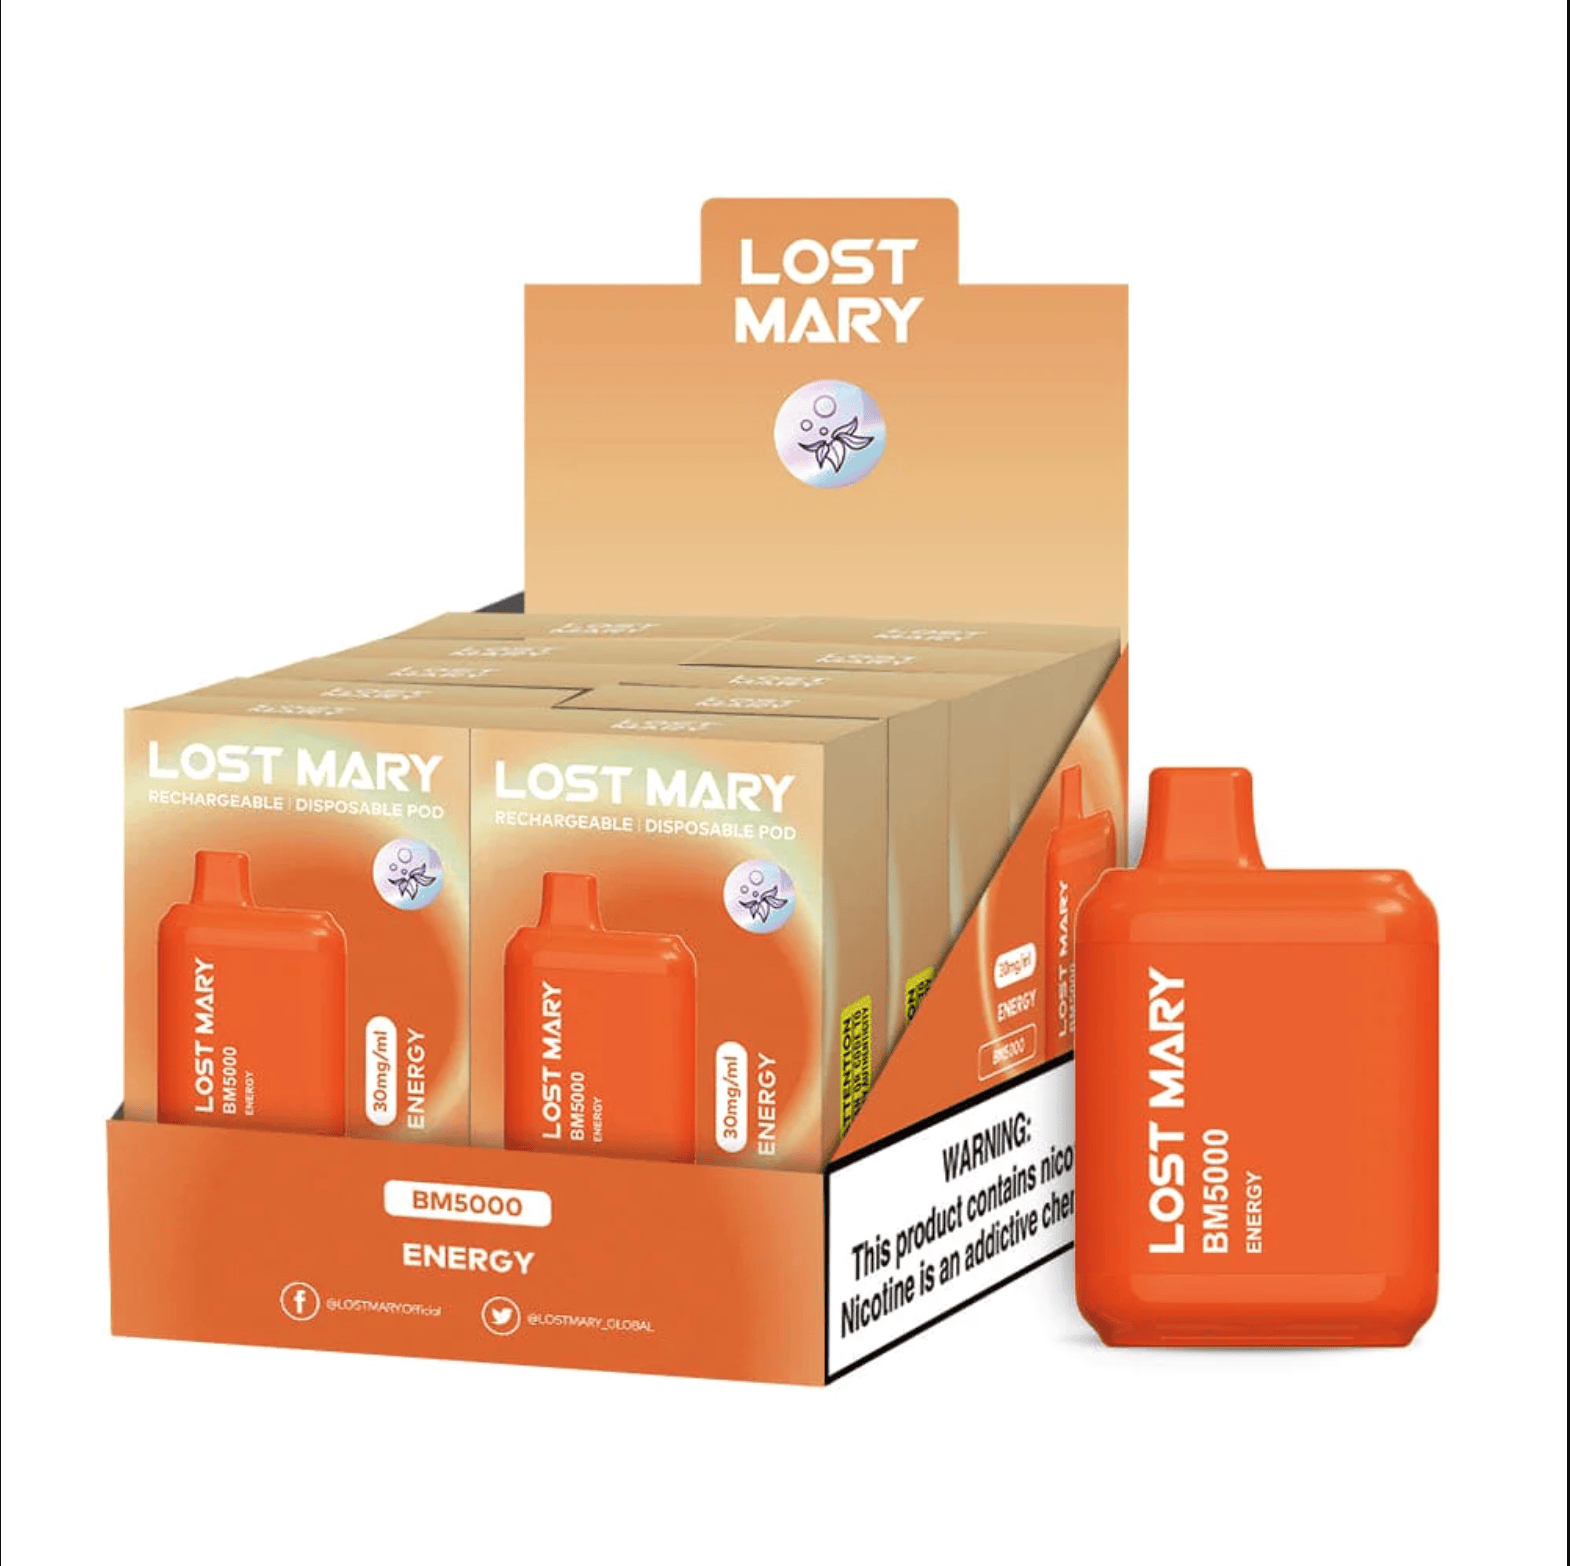 Lost Mary BM5000 Energy flavored disposable vape device and box.